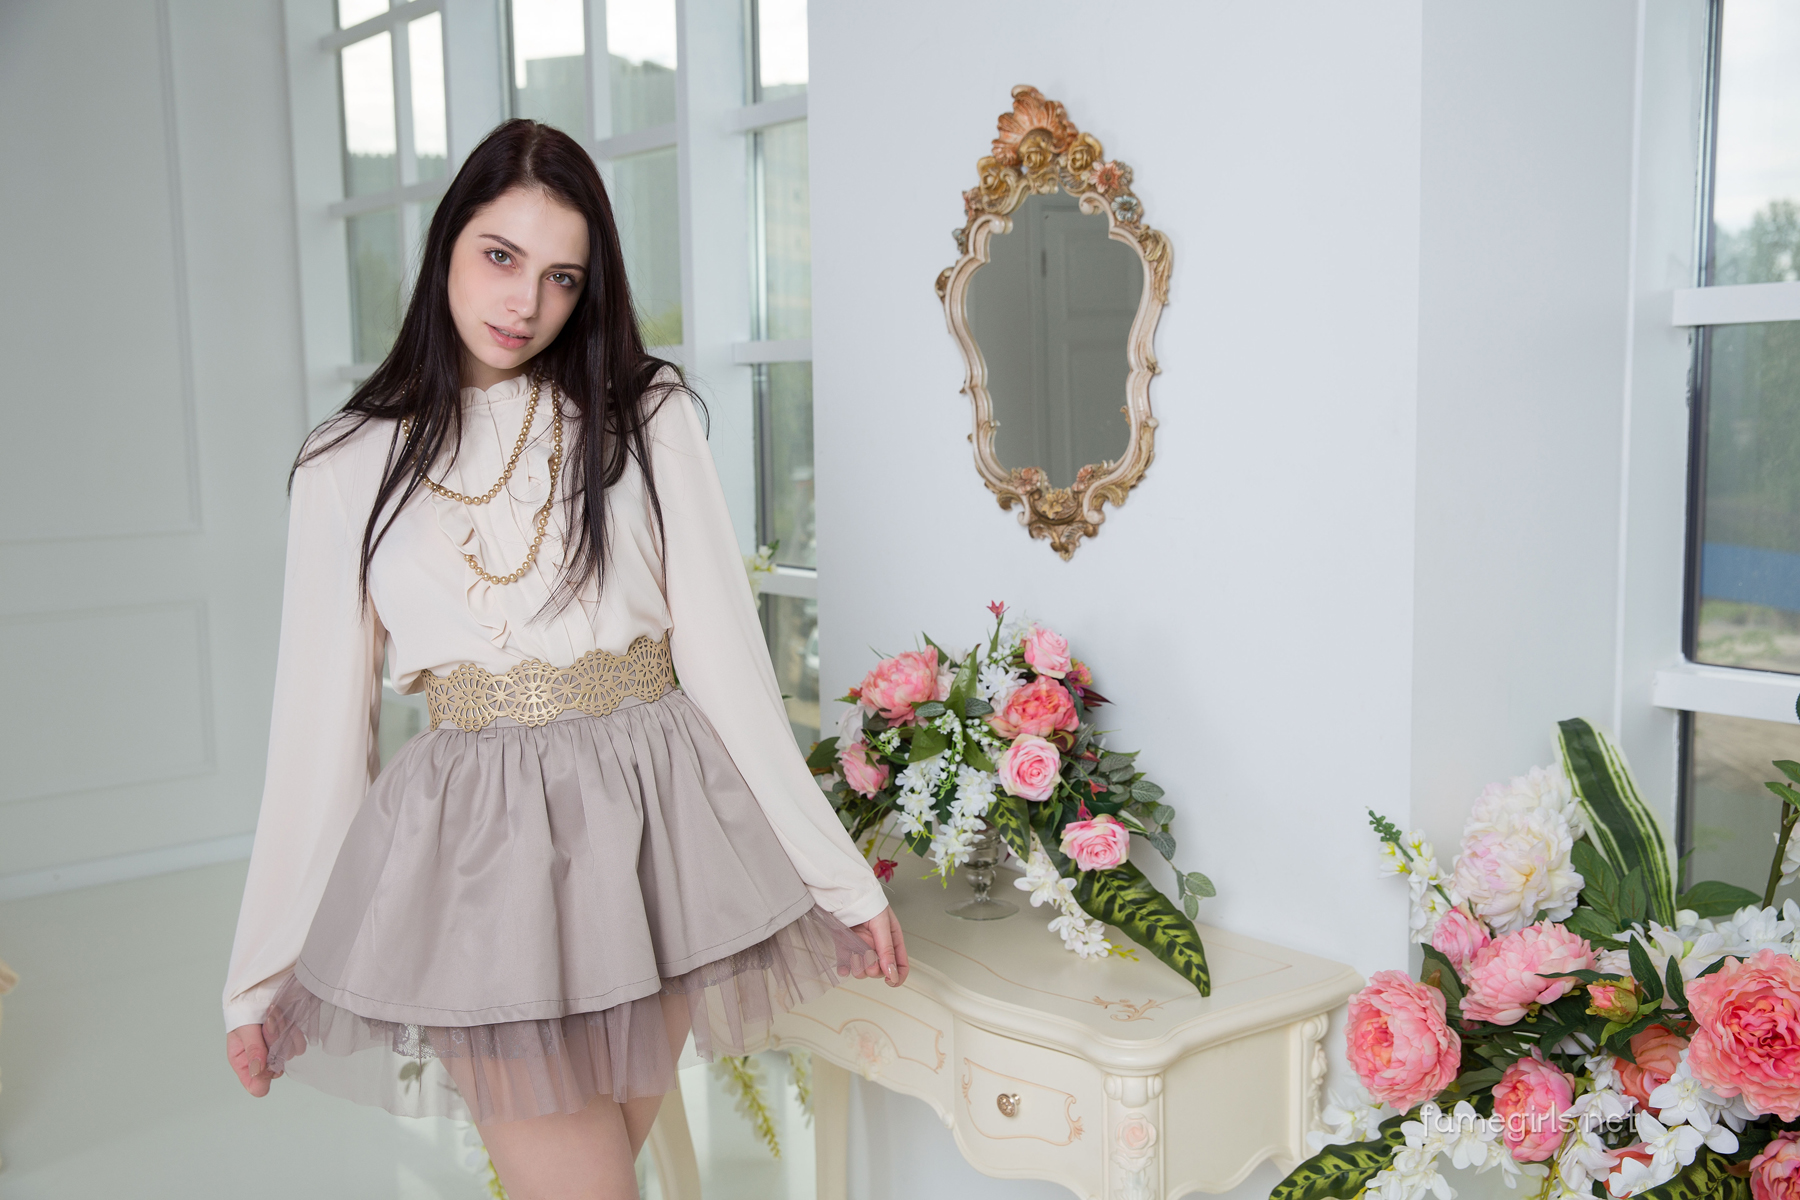 Isabella Frilly Skirt at Cherry Nudes